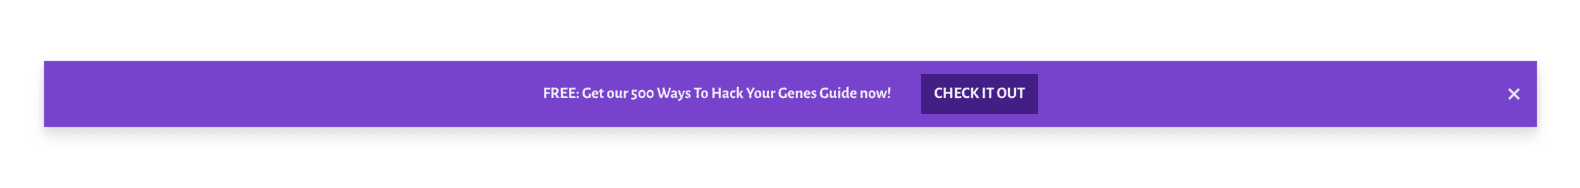 Alert bar: FREE: Get our 500 Ways To Hack Your Genes Guide now!